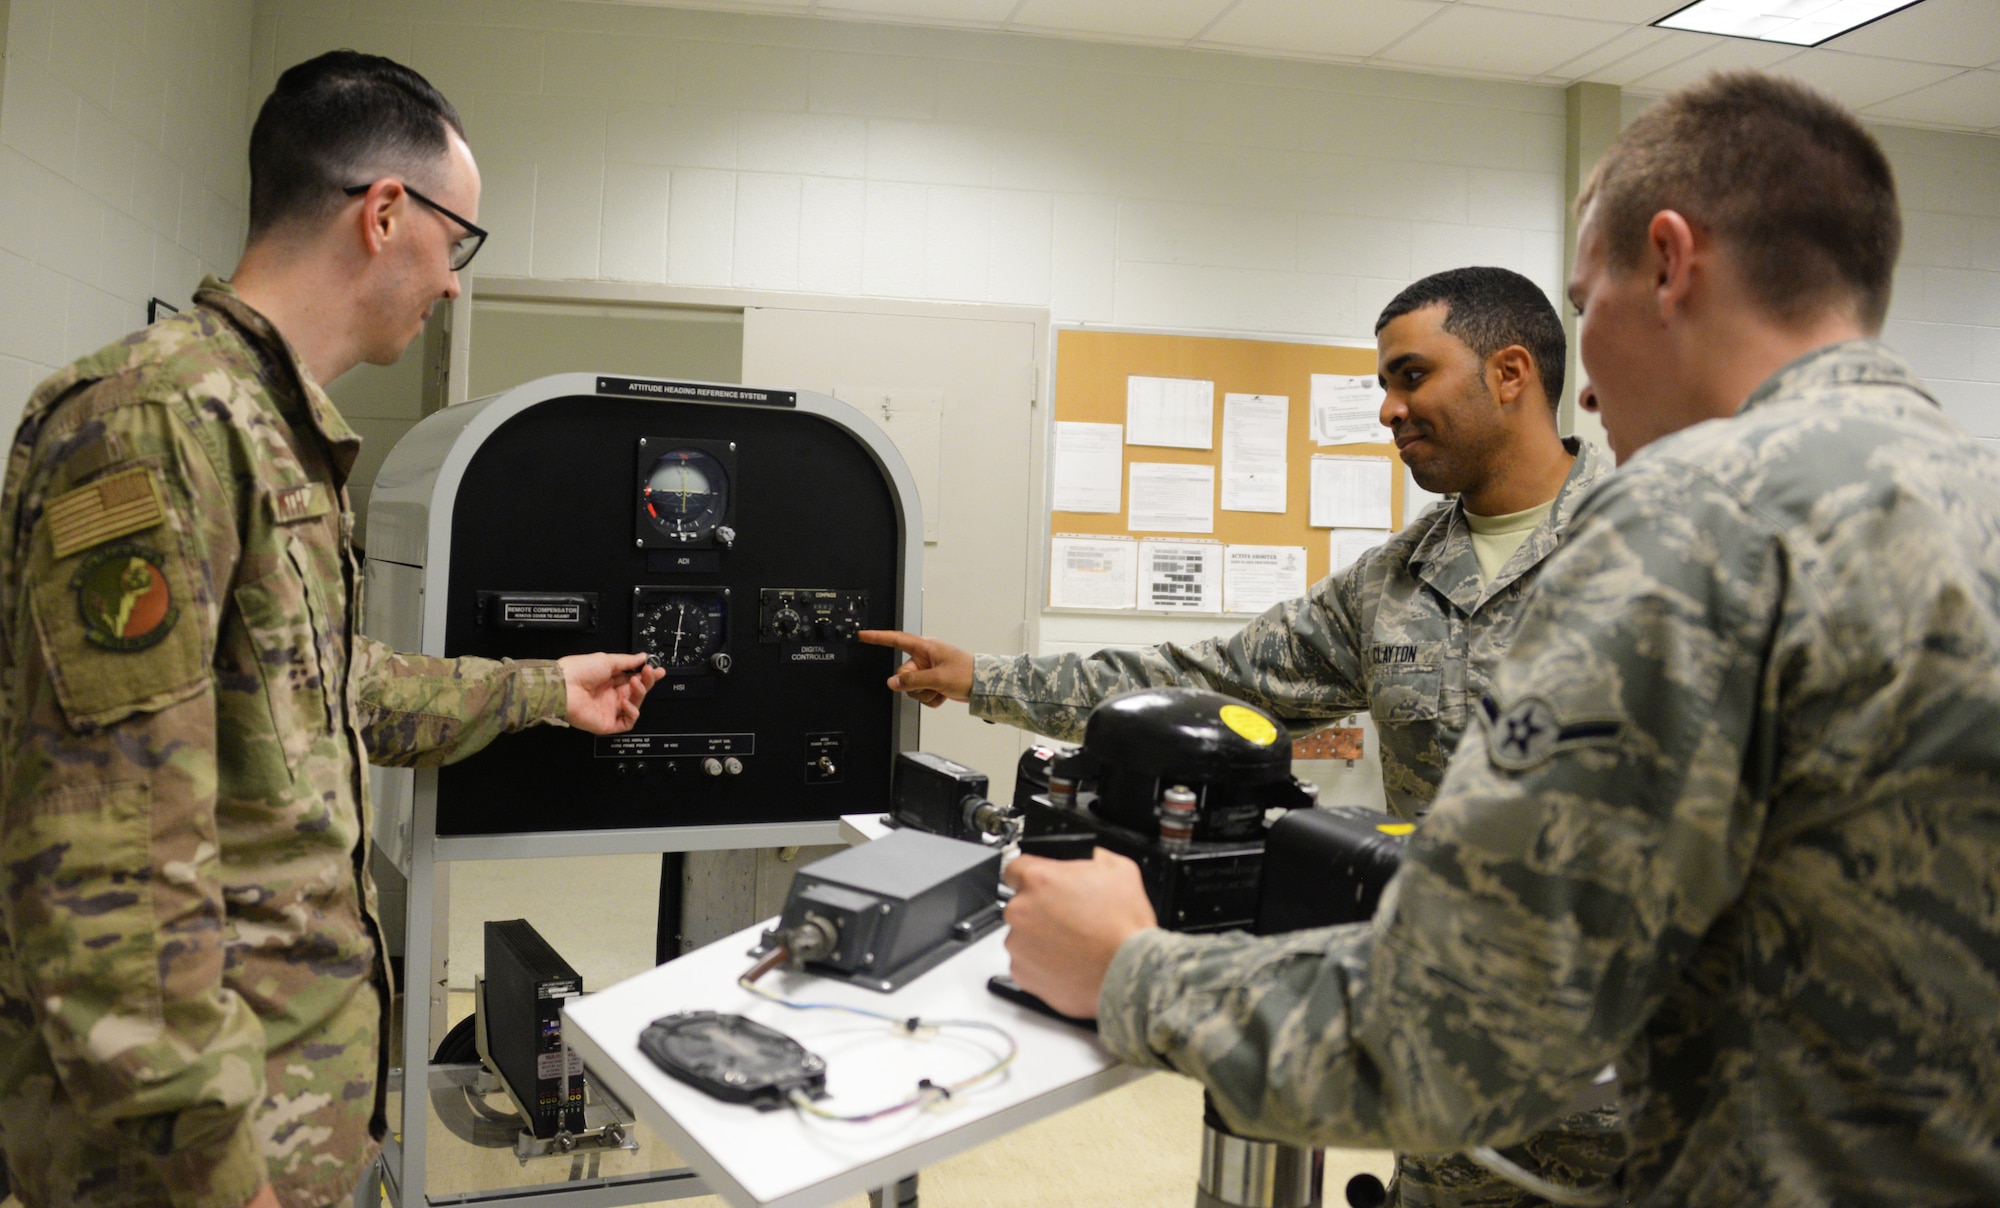 365th Training Squadron instructor and students review a basic navigation system at Sheppard AFB